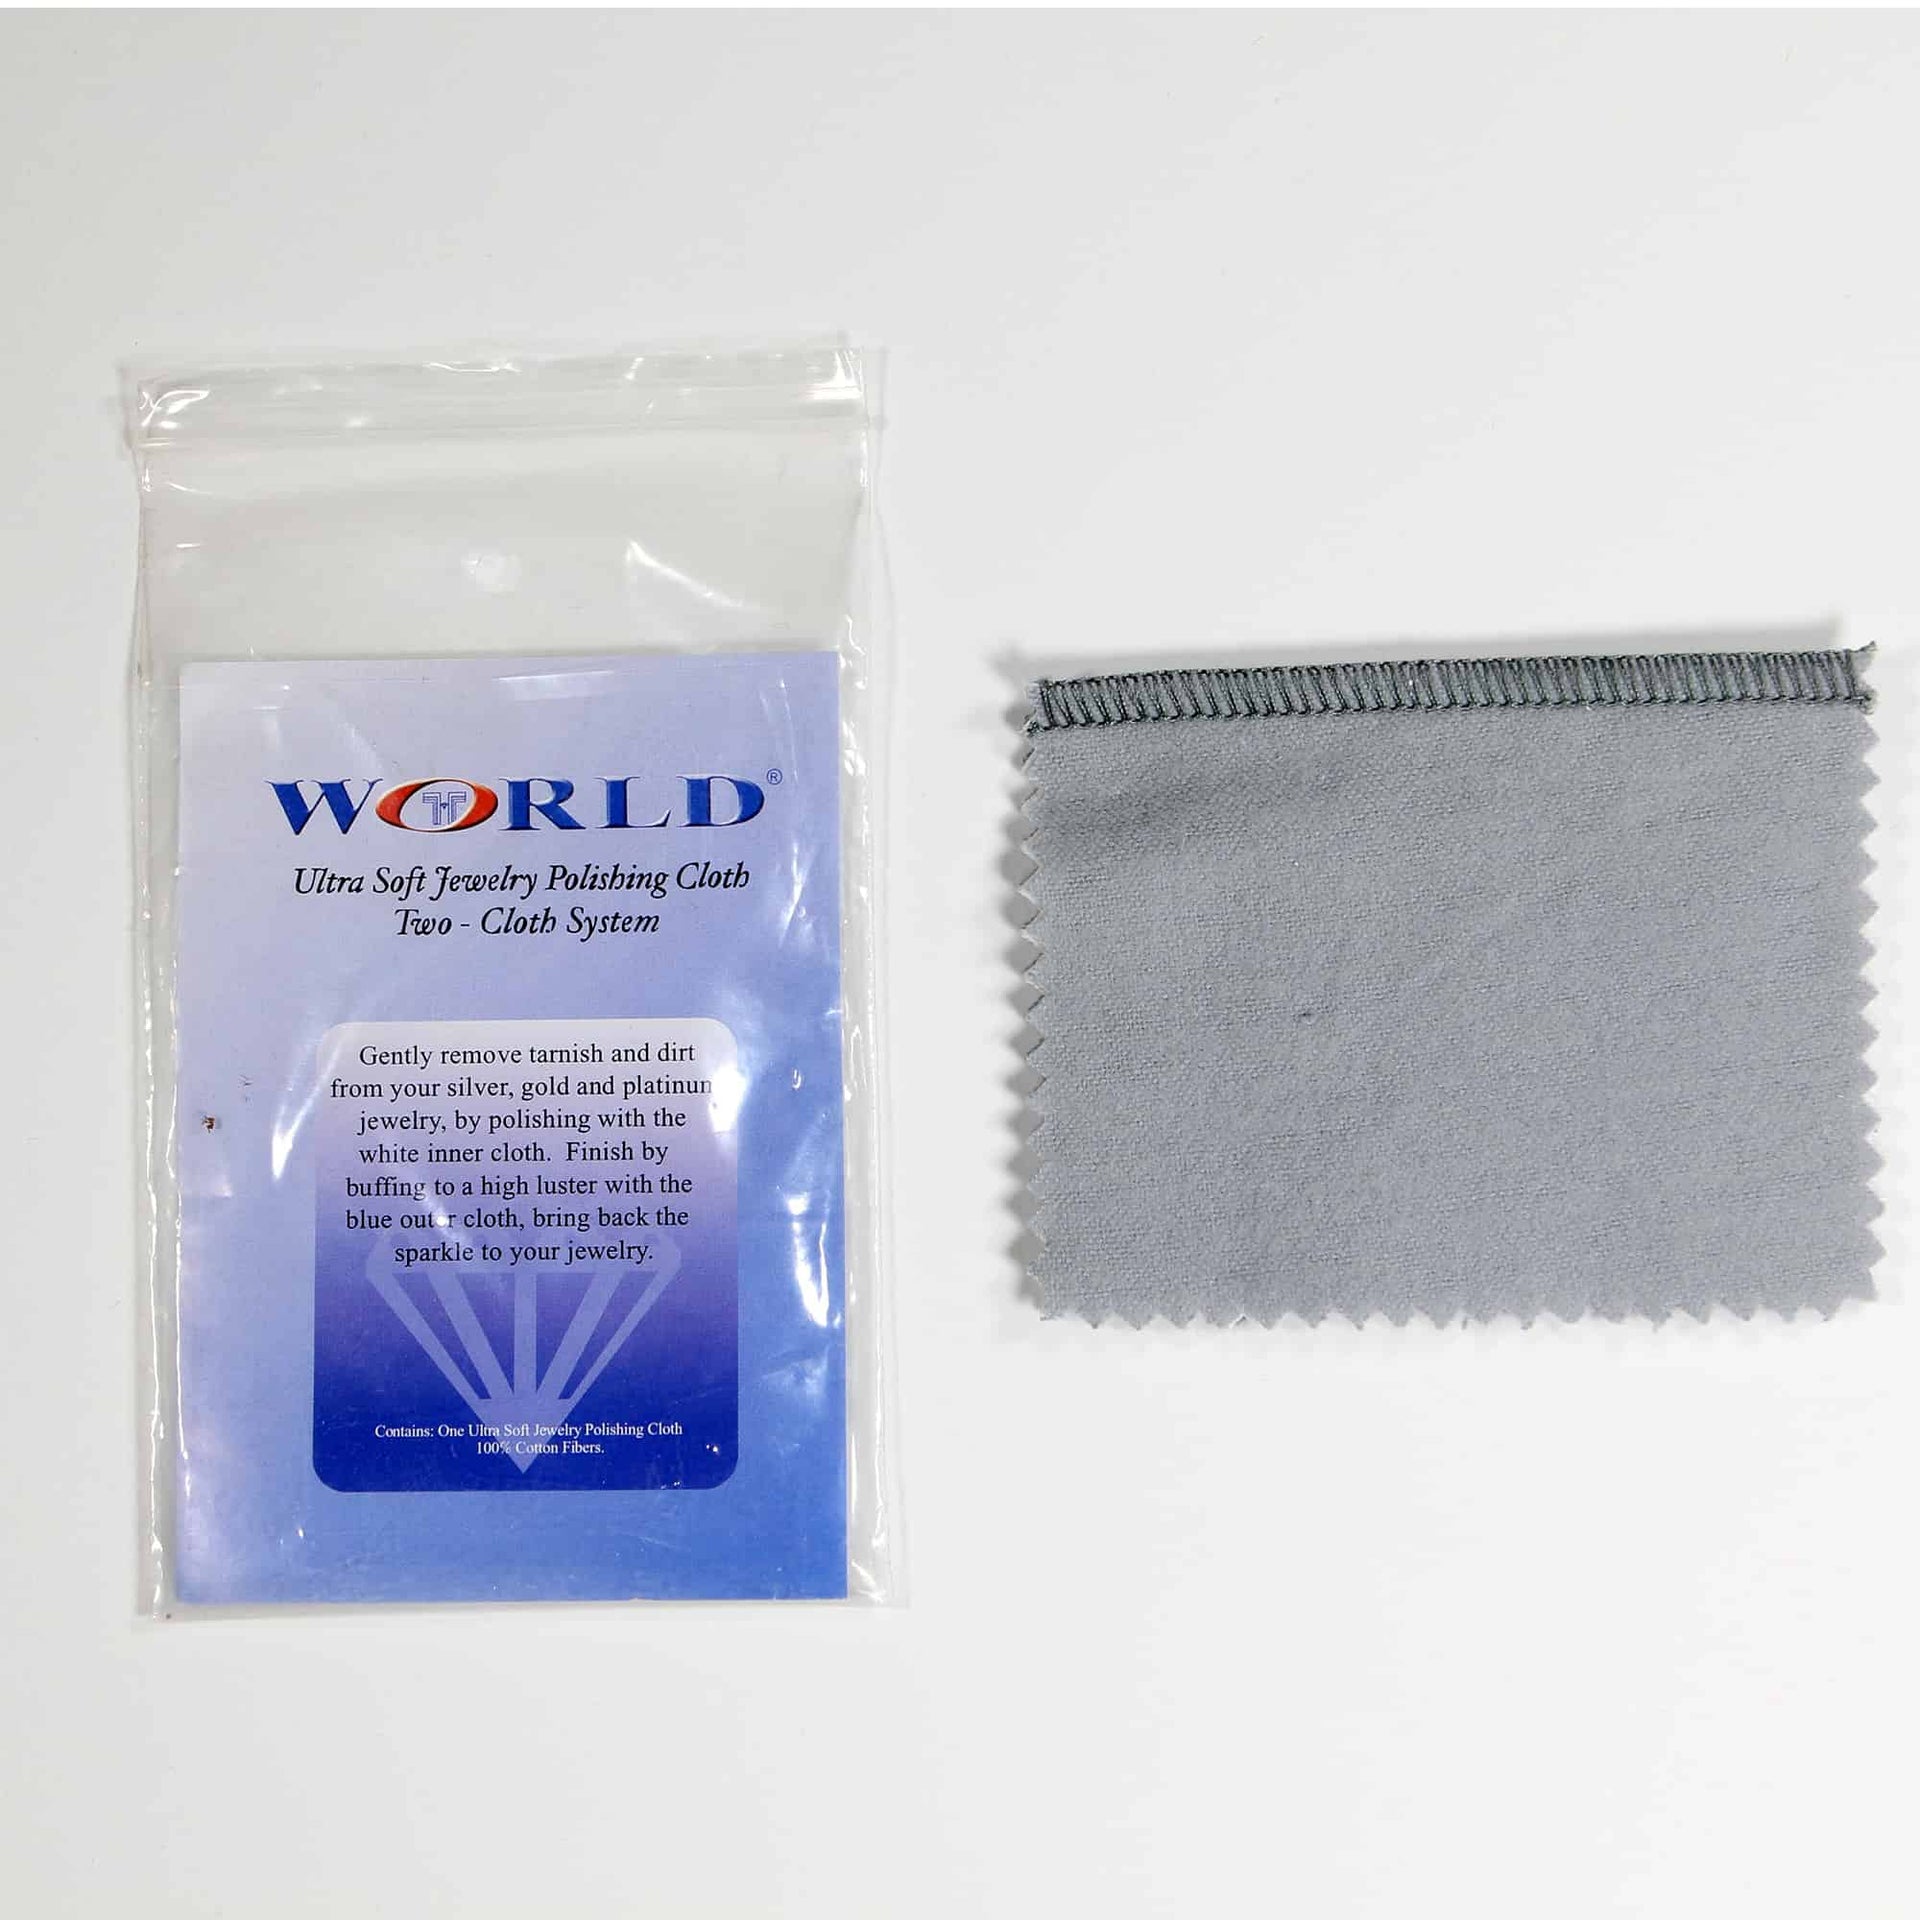 Extra Silver Polishing Cloth for Jewelry 